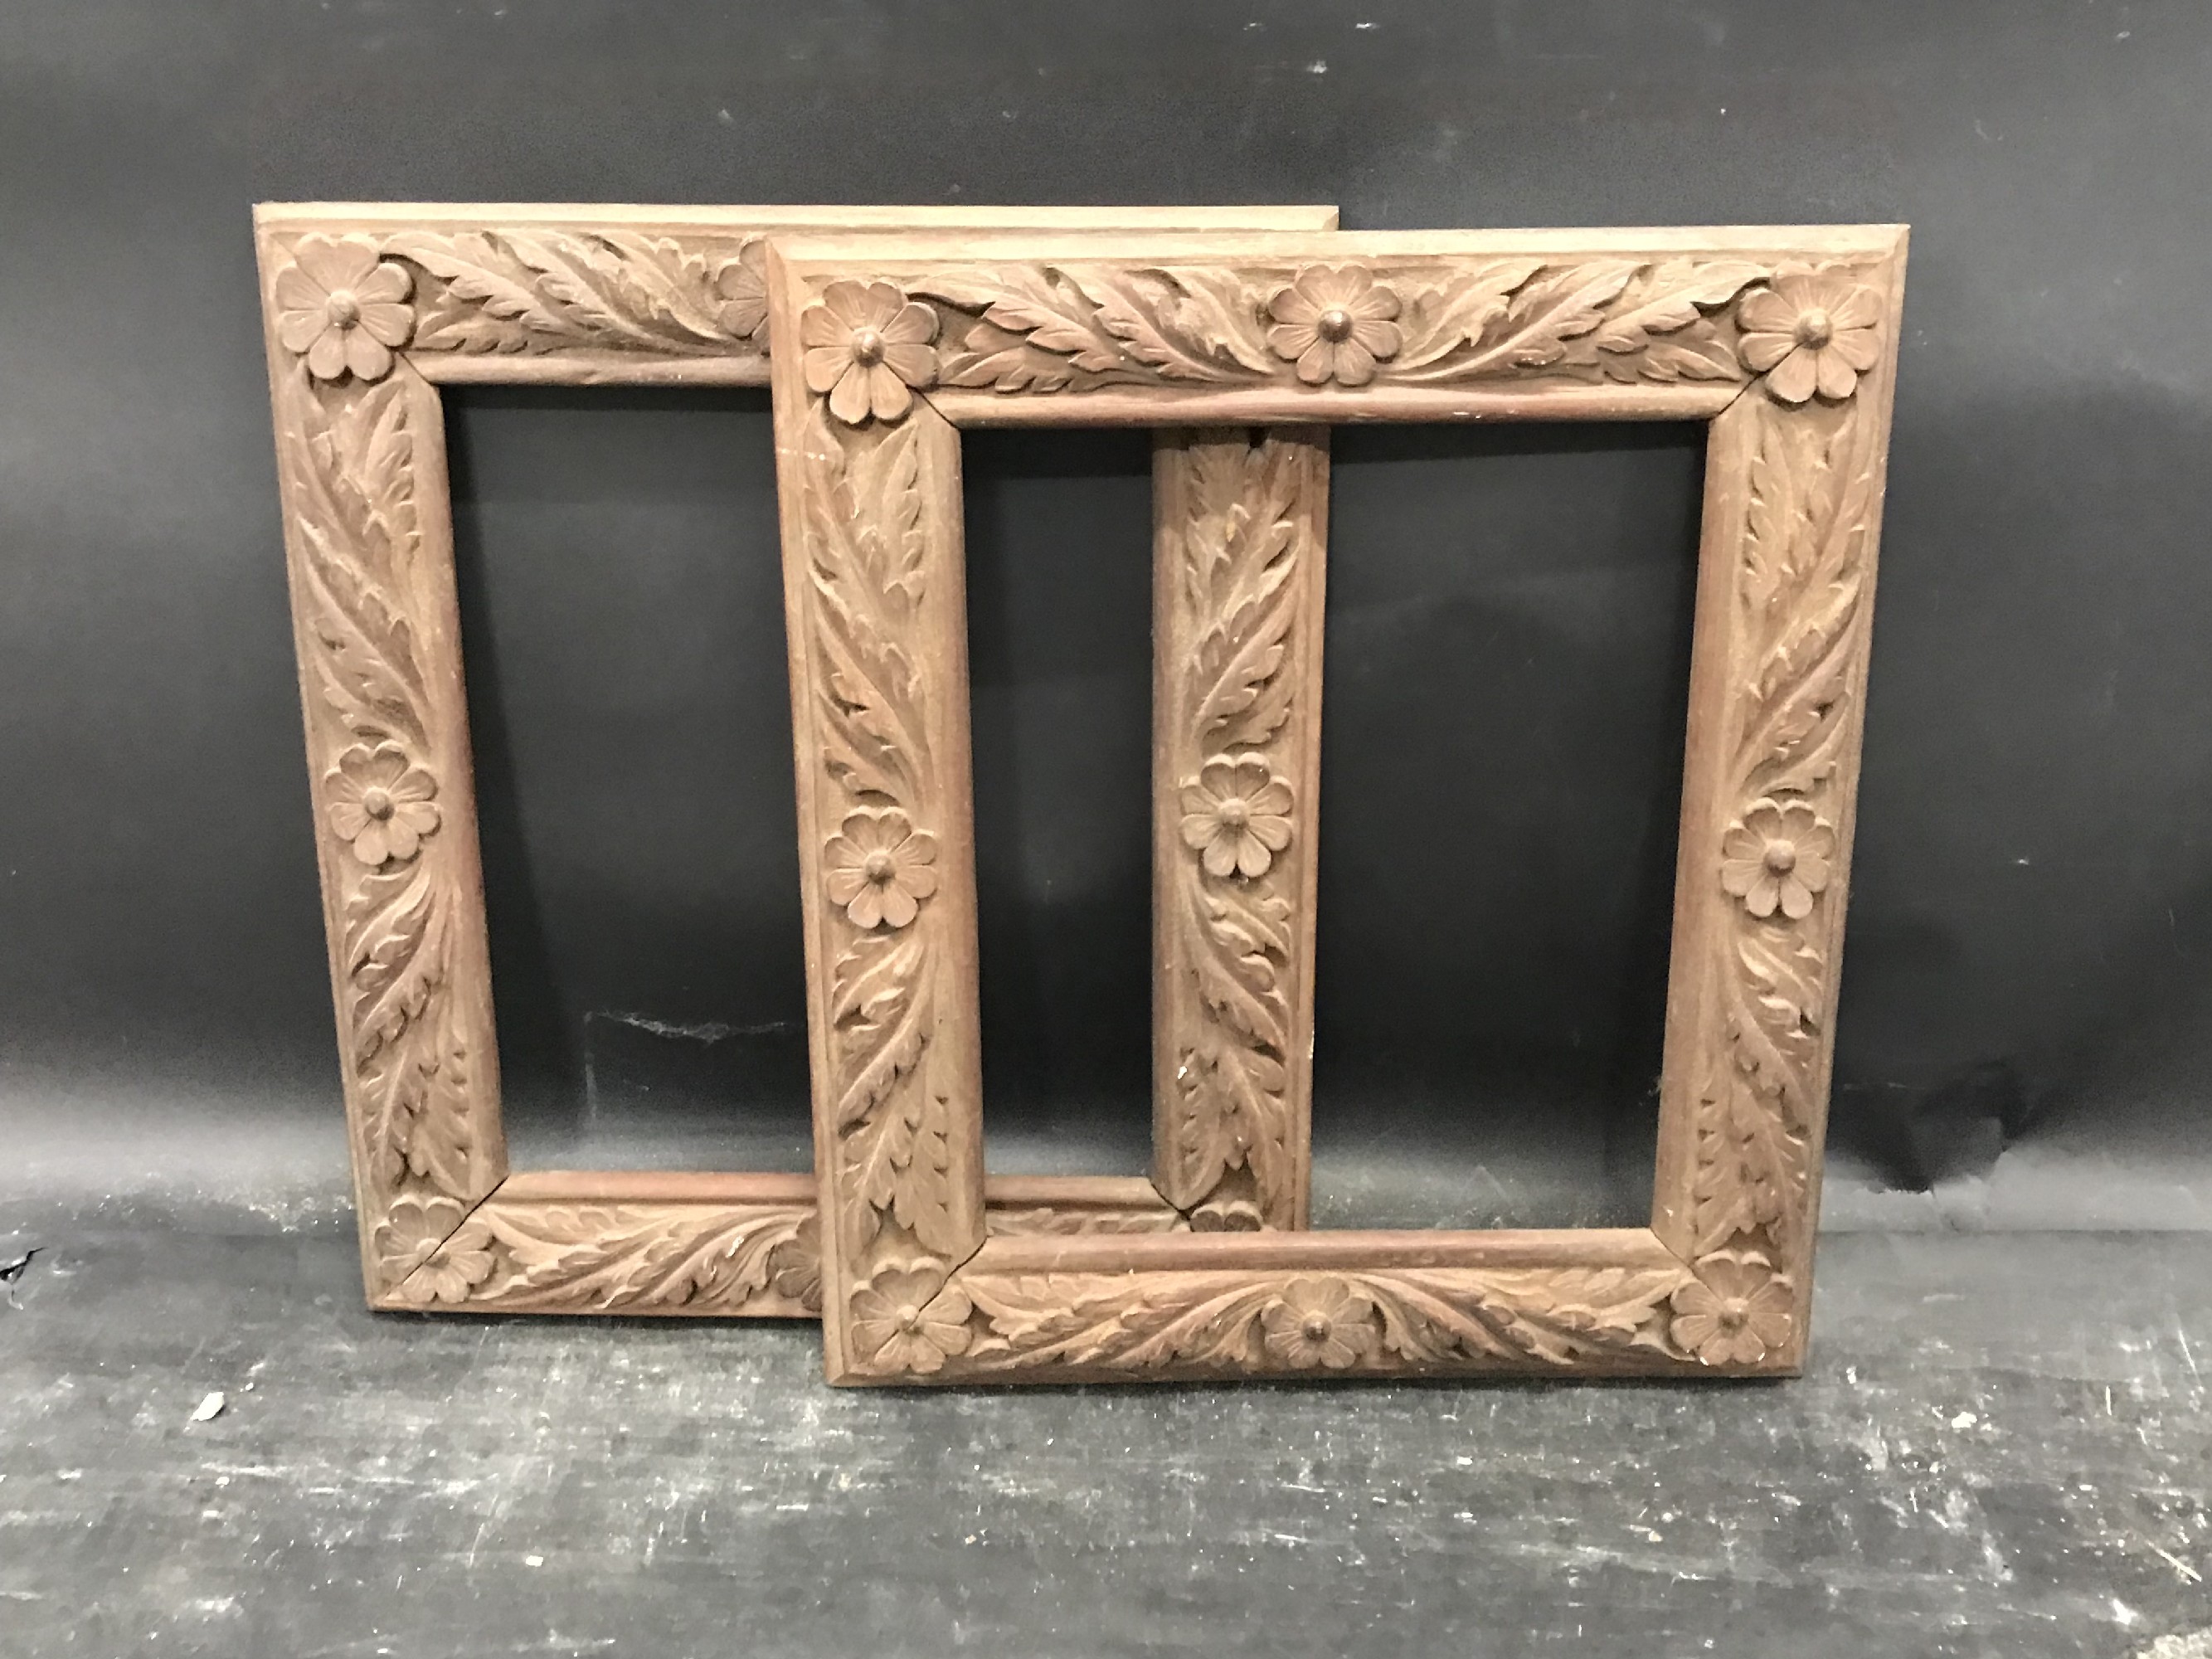 19th Century English School. A Carved Dark Wood Frame, 12" x 10", and the companion piece, a Pair ( - Image 2 of 3